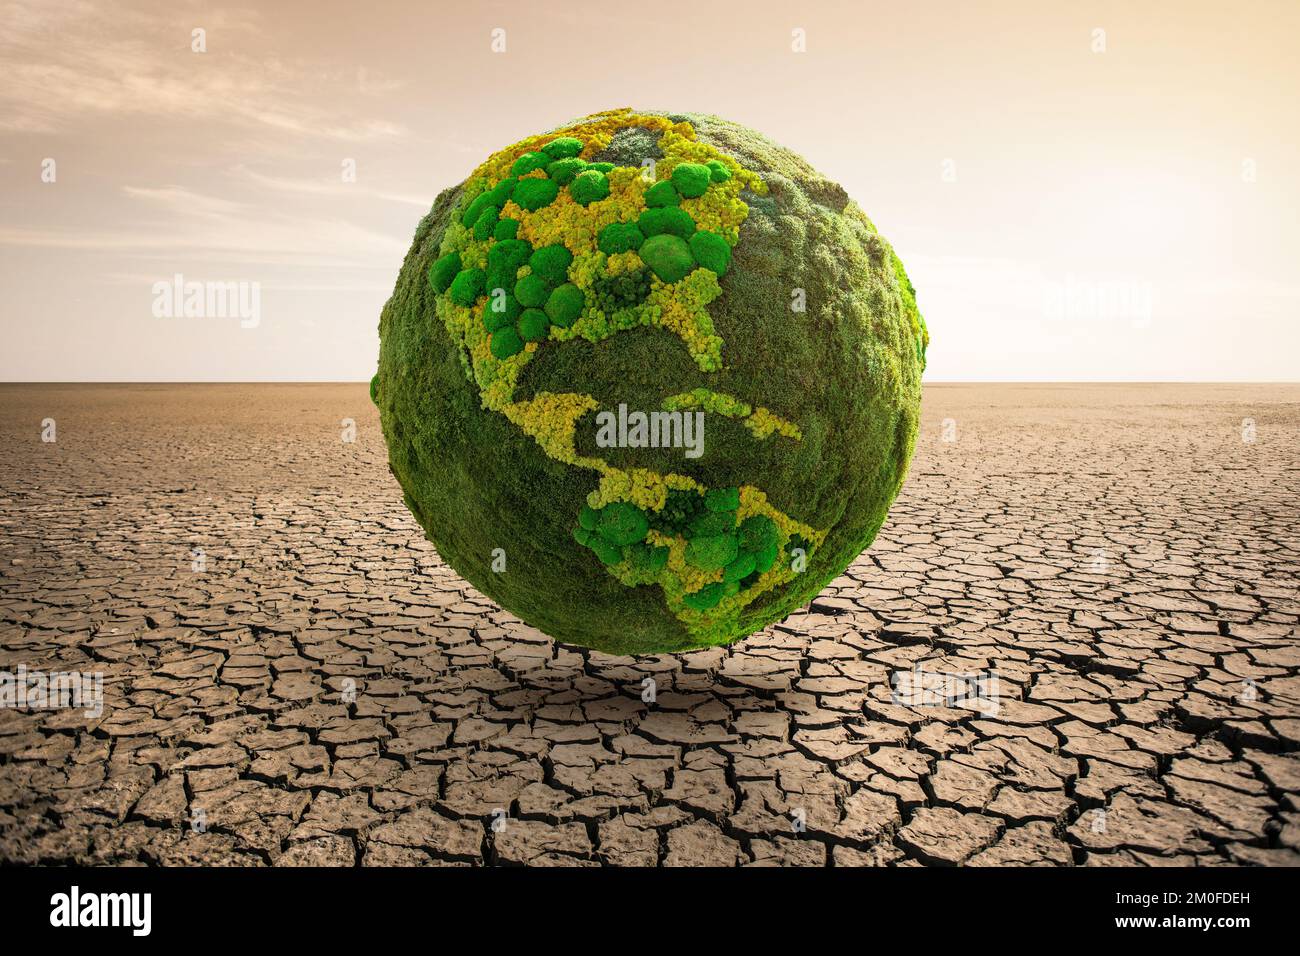 Green planet earth on desert. Symbol of global warming and climate change Stock Photo